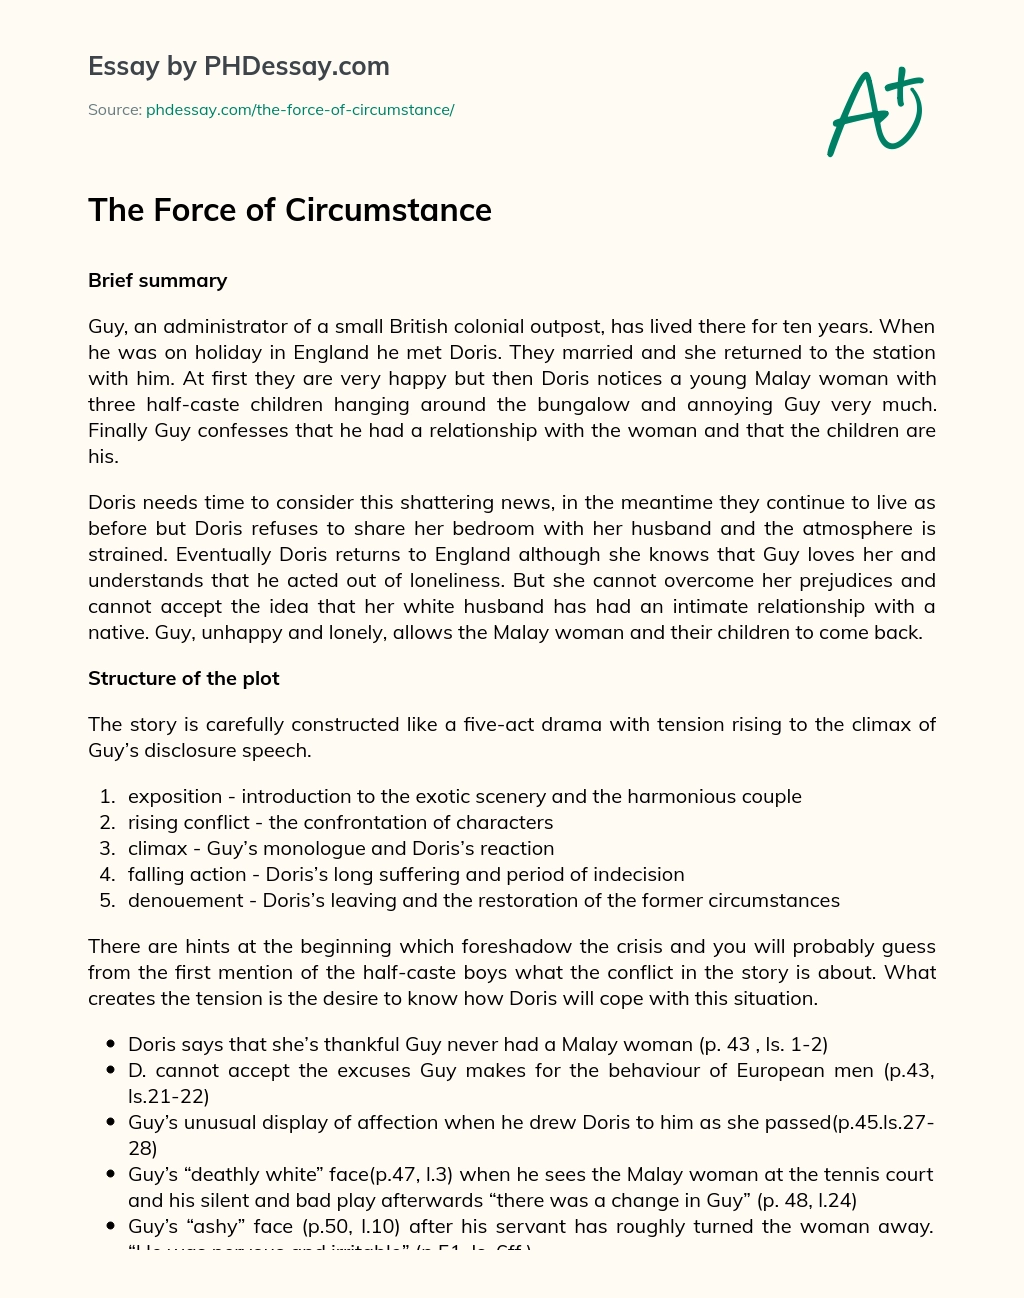 The Force of Circumstance essay